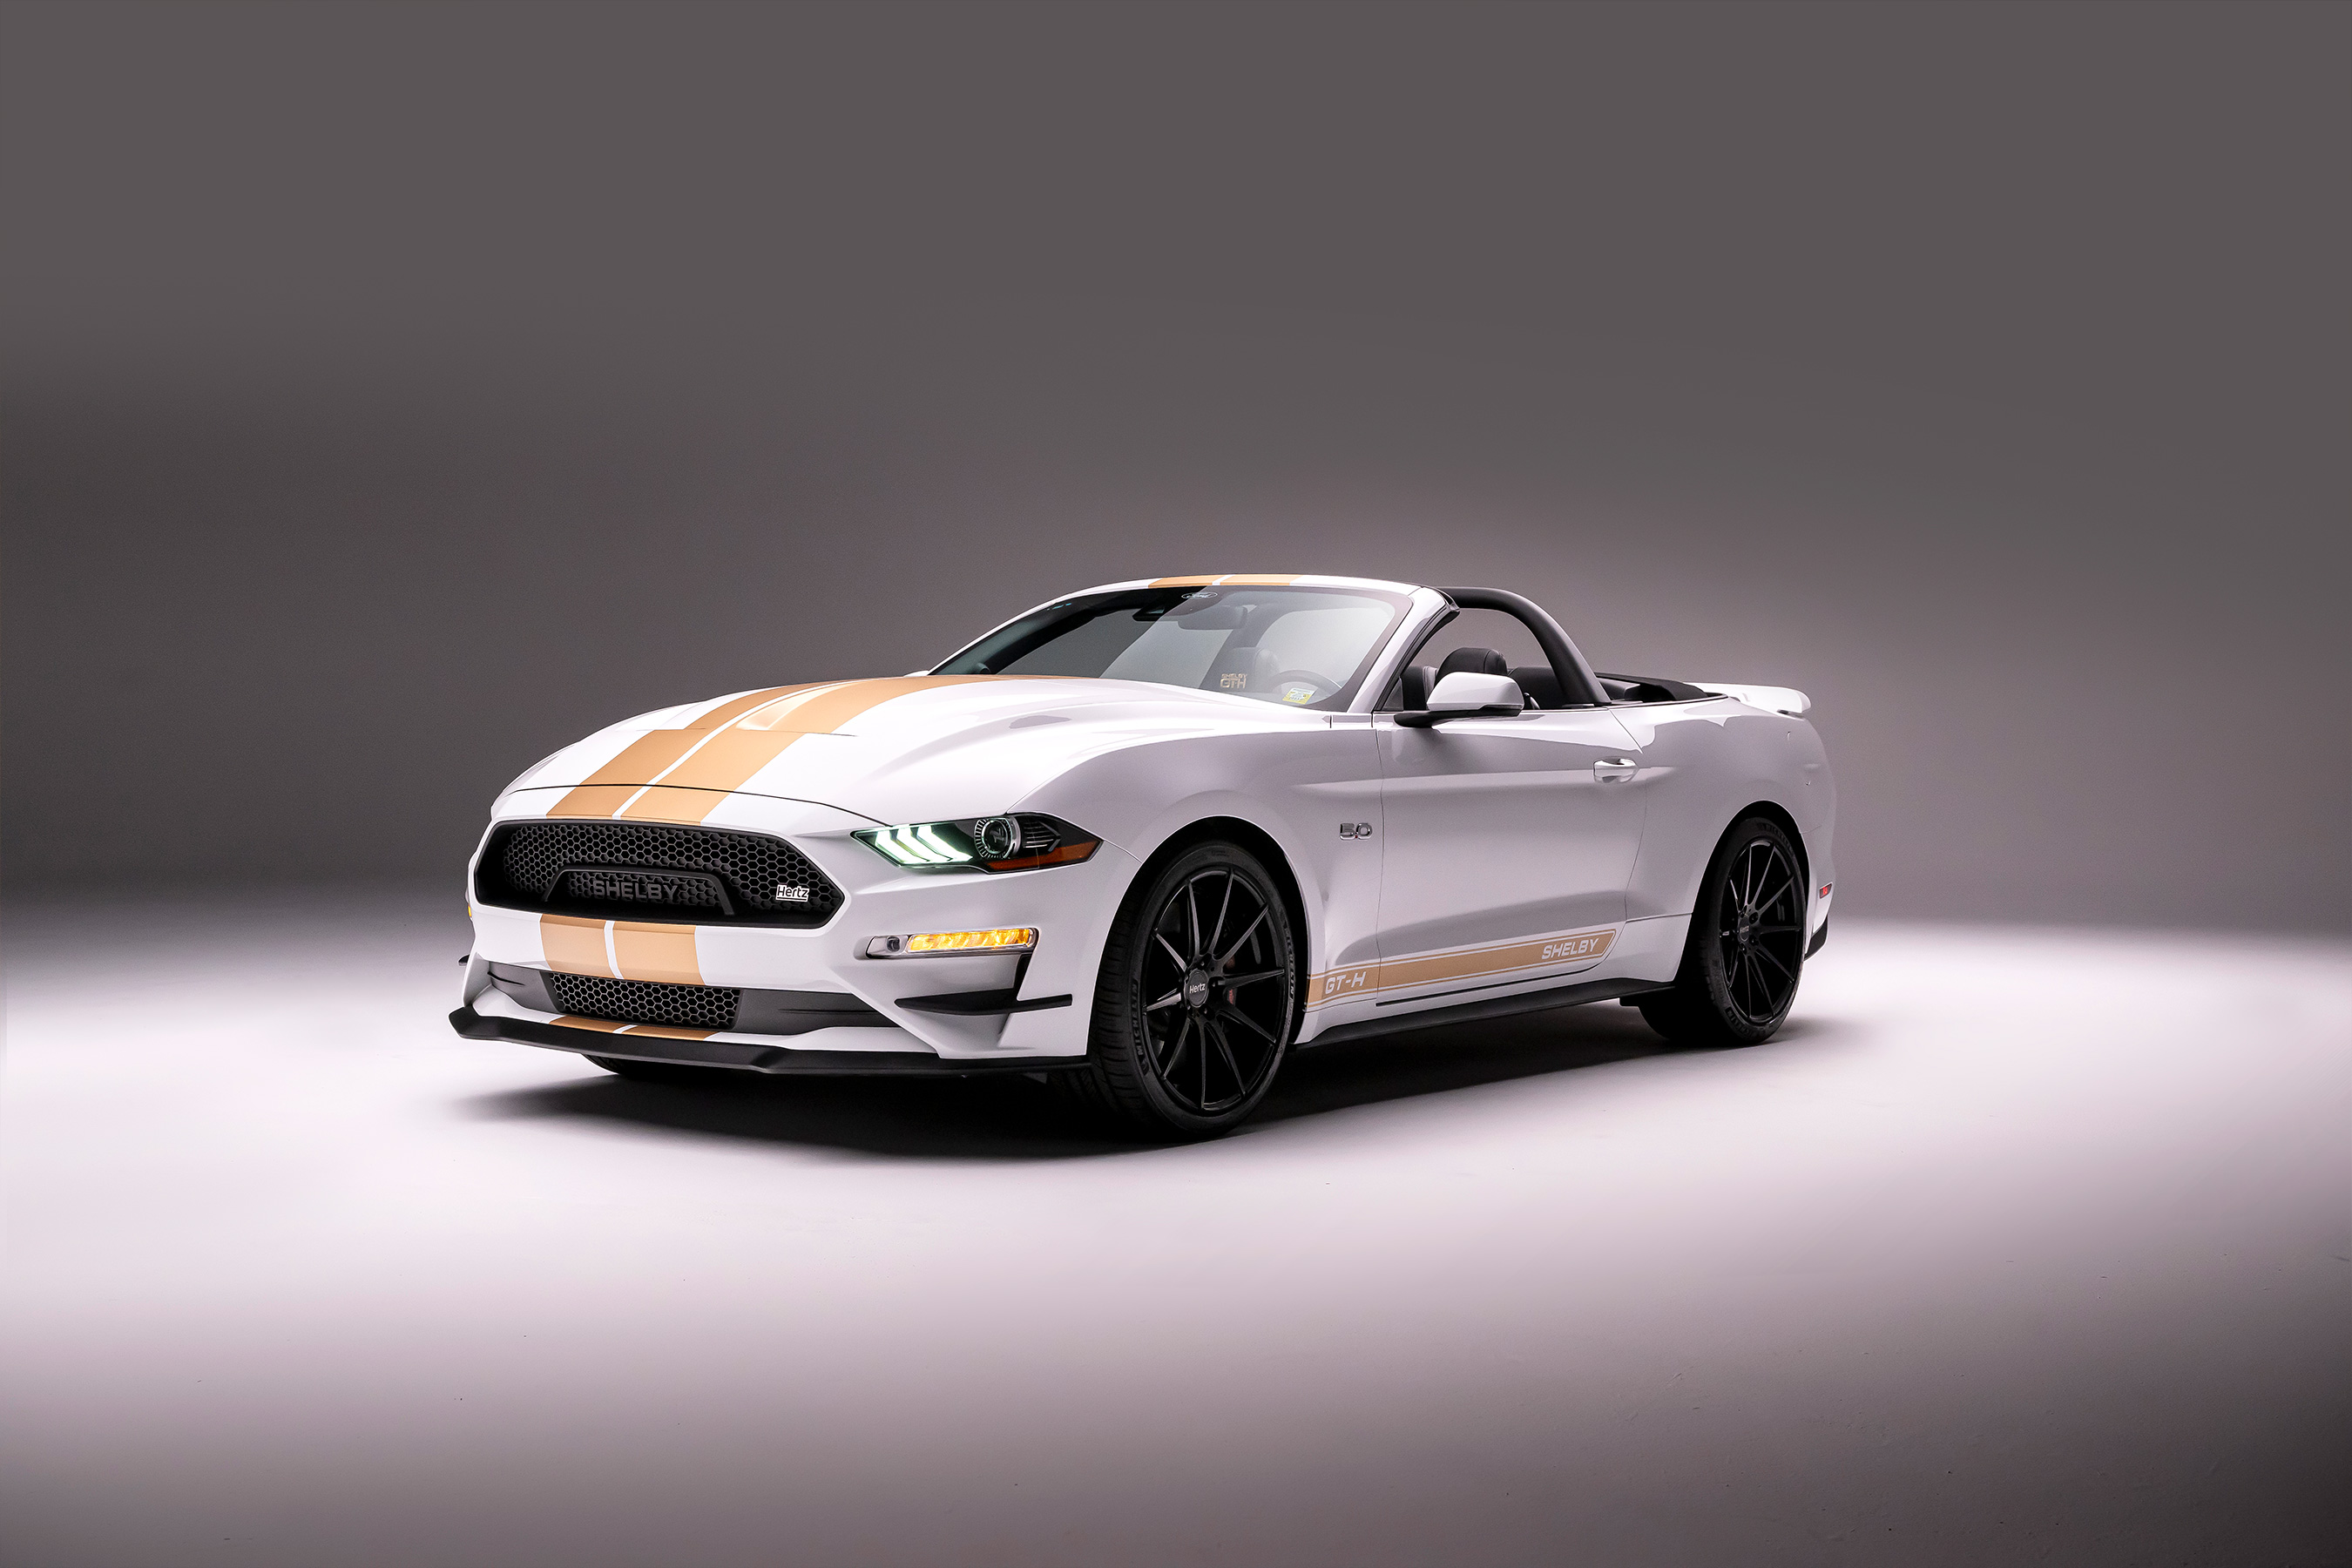 The collection also includes a Mustang Shelby GT-H fastback and convertible, each equipped with a Borla cat-back performance exhaust for the 5.0L V8, and a staggered wheel kit.